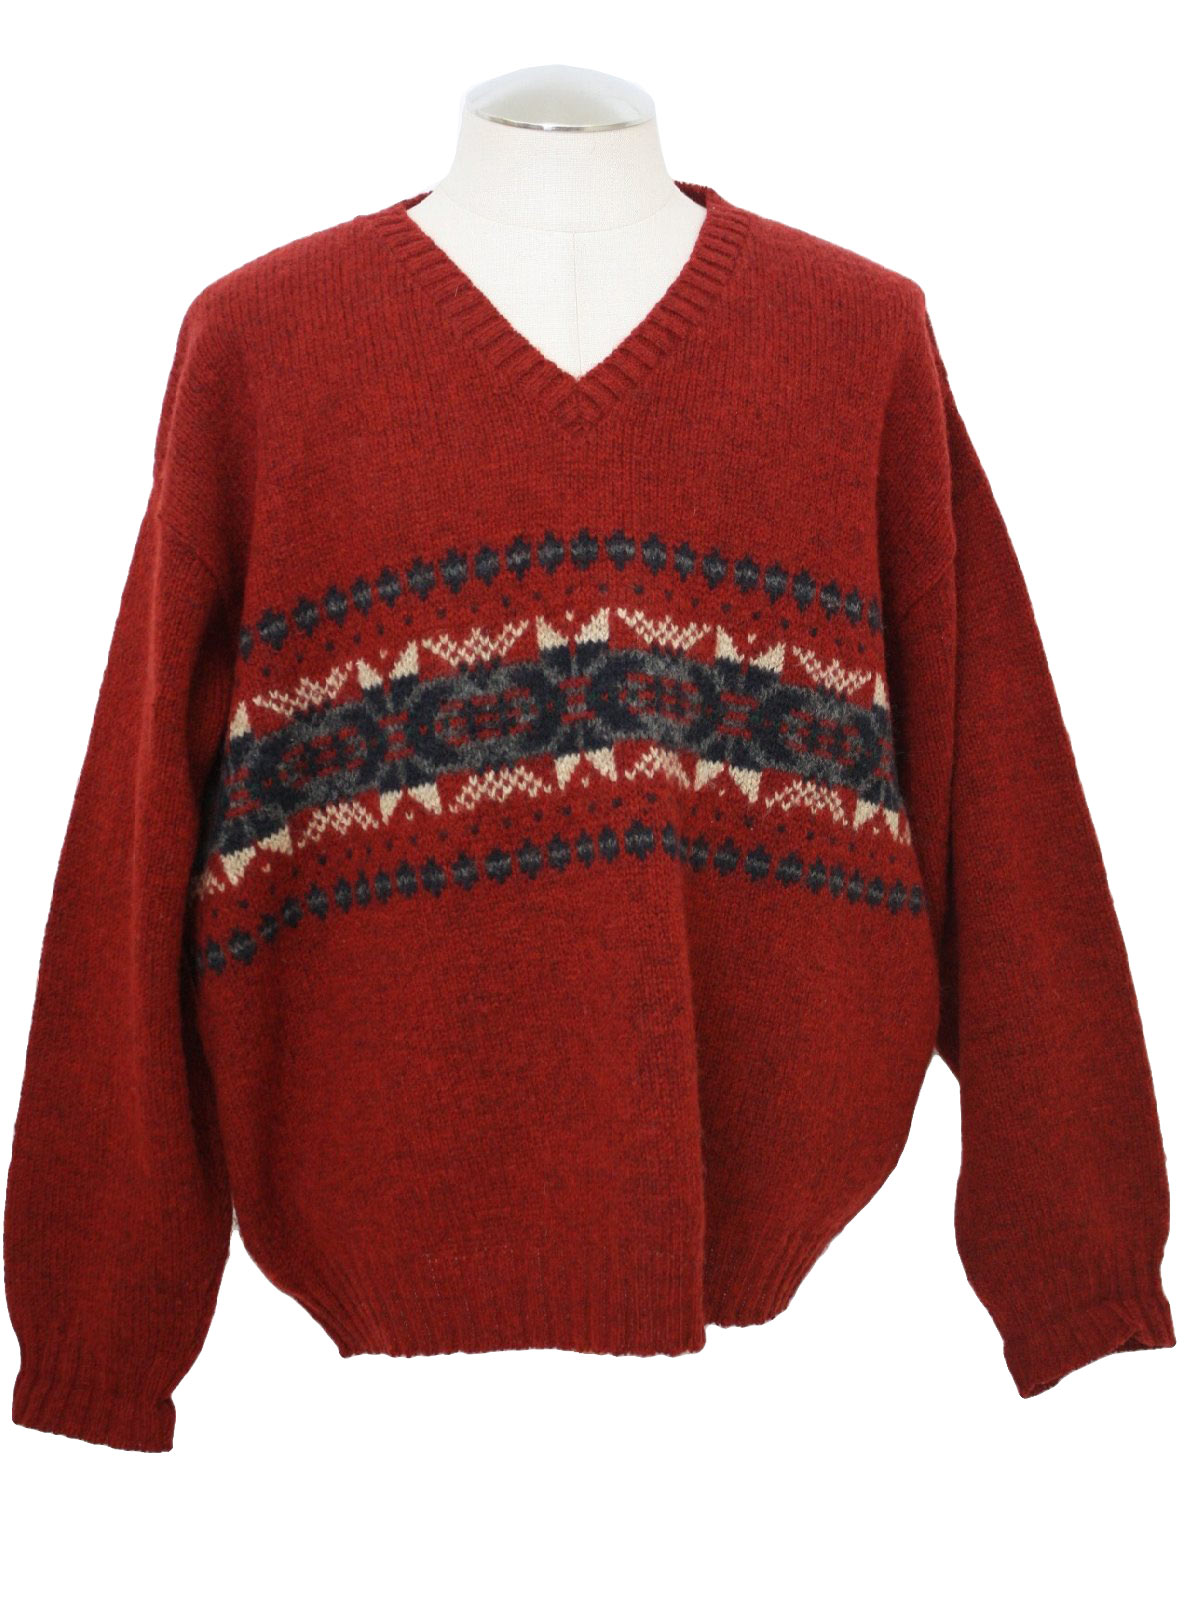 1980's Retro Sweater: 80s -no label- Mens shades of red, heather grey ...